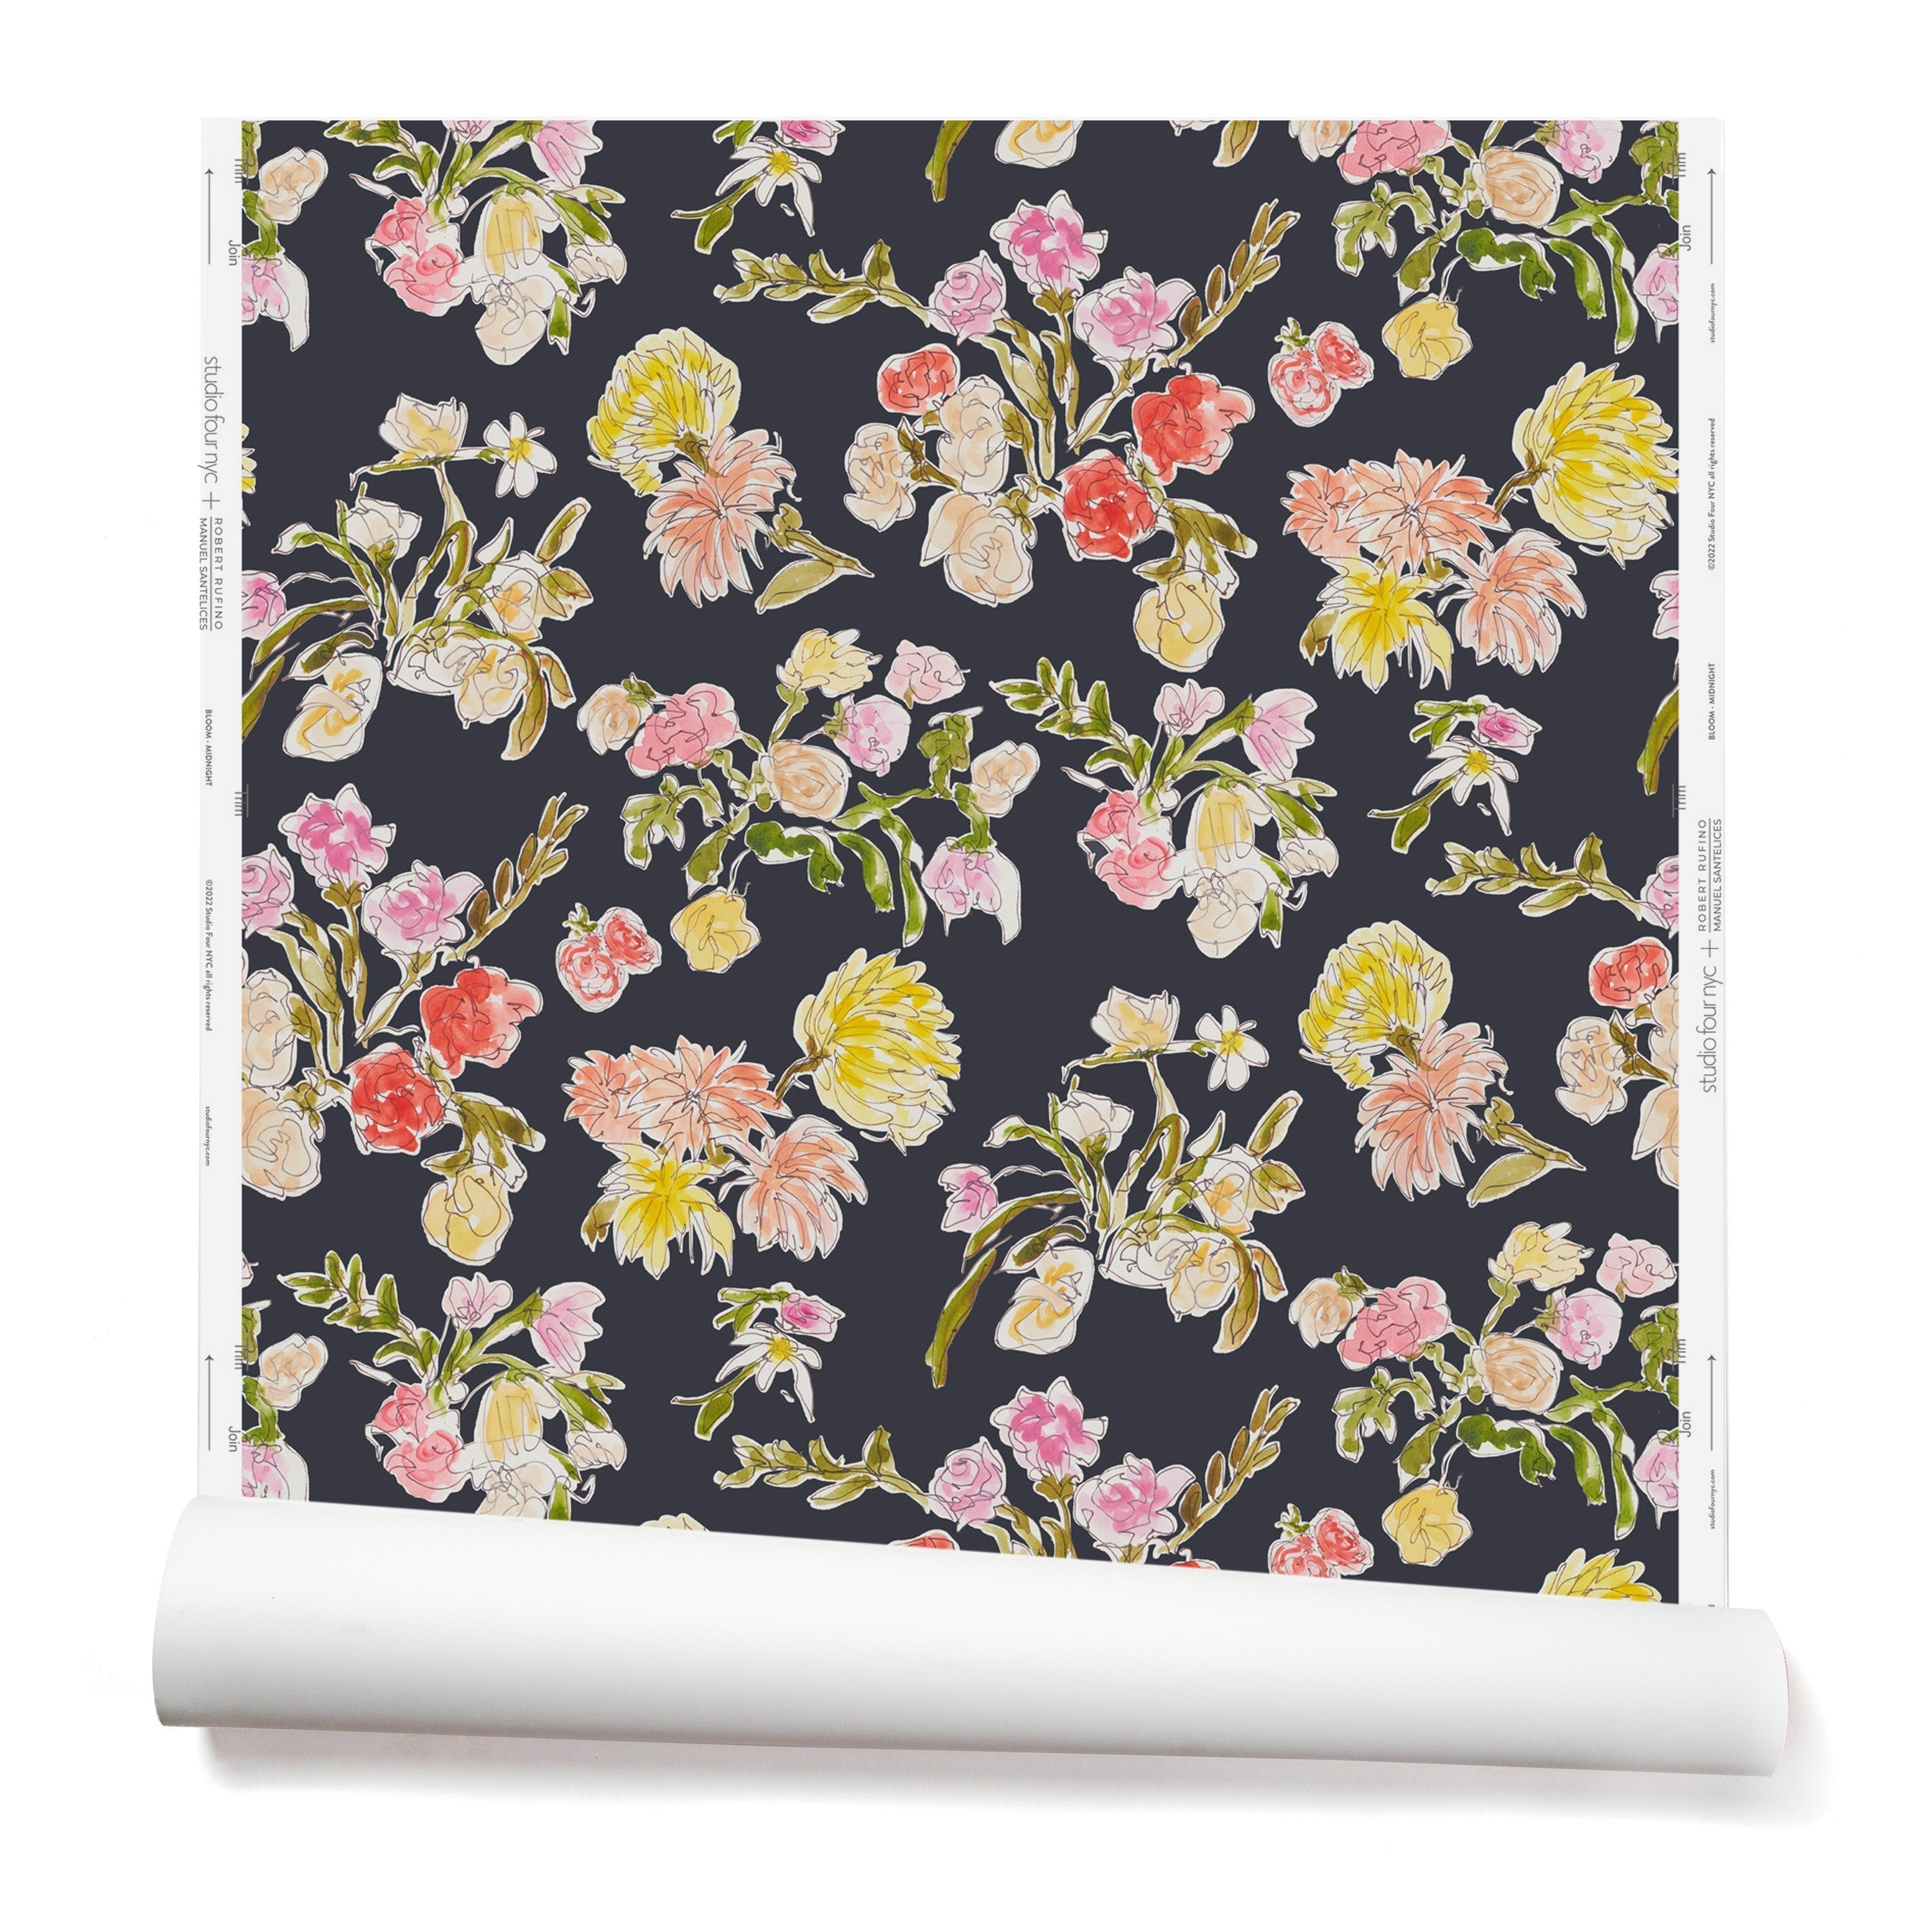 Partially unrolled wallpaper with a pattern of large-scale line-drawn flowers in gray ink with red, pink and yellow watercolors, on a black background.